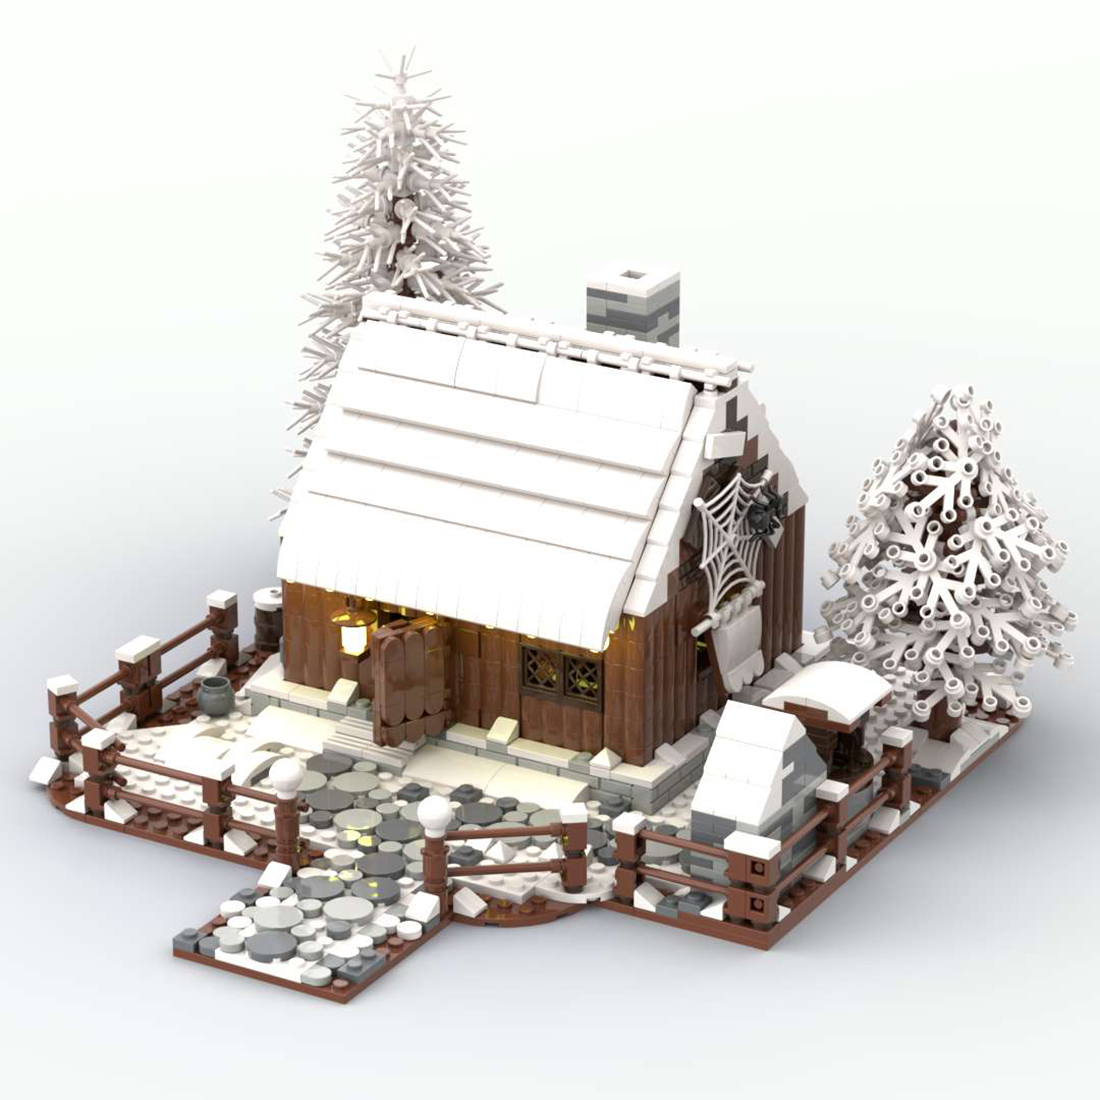 1781+Pcs Mountain Forest Winter Wooden House with Fireplace Bricks Model DIY Building Block Kits